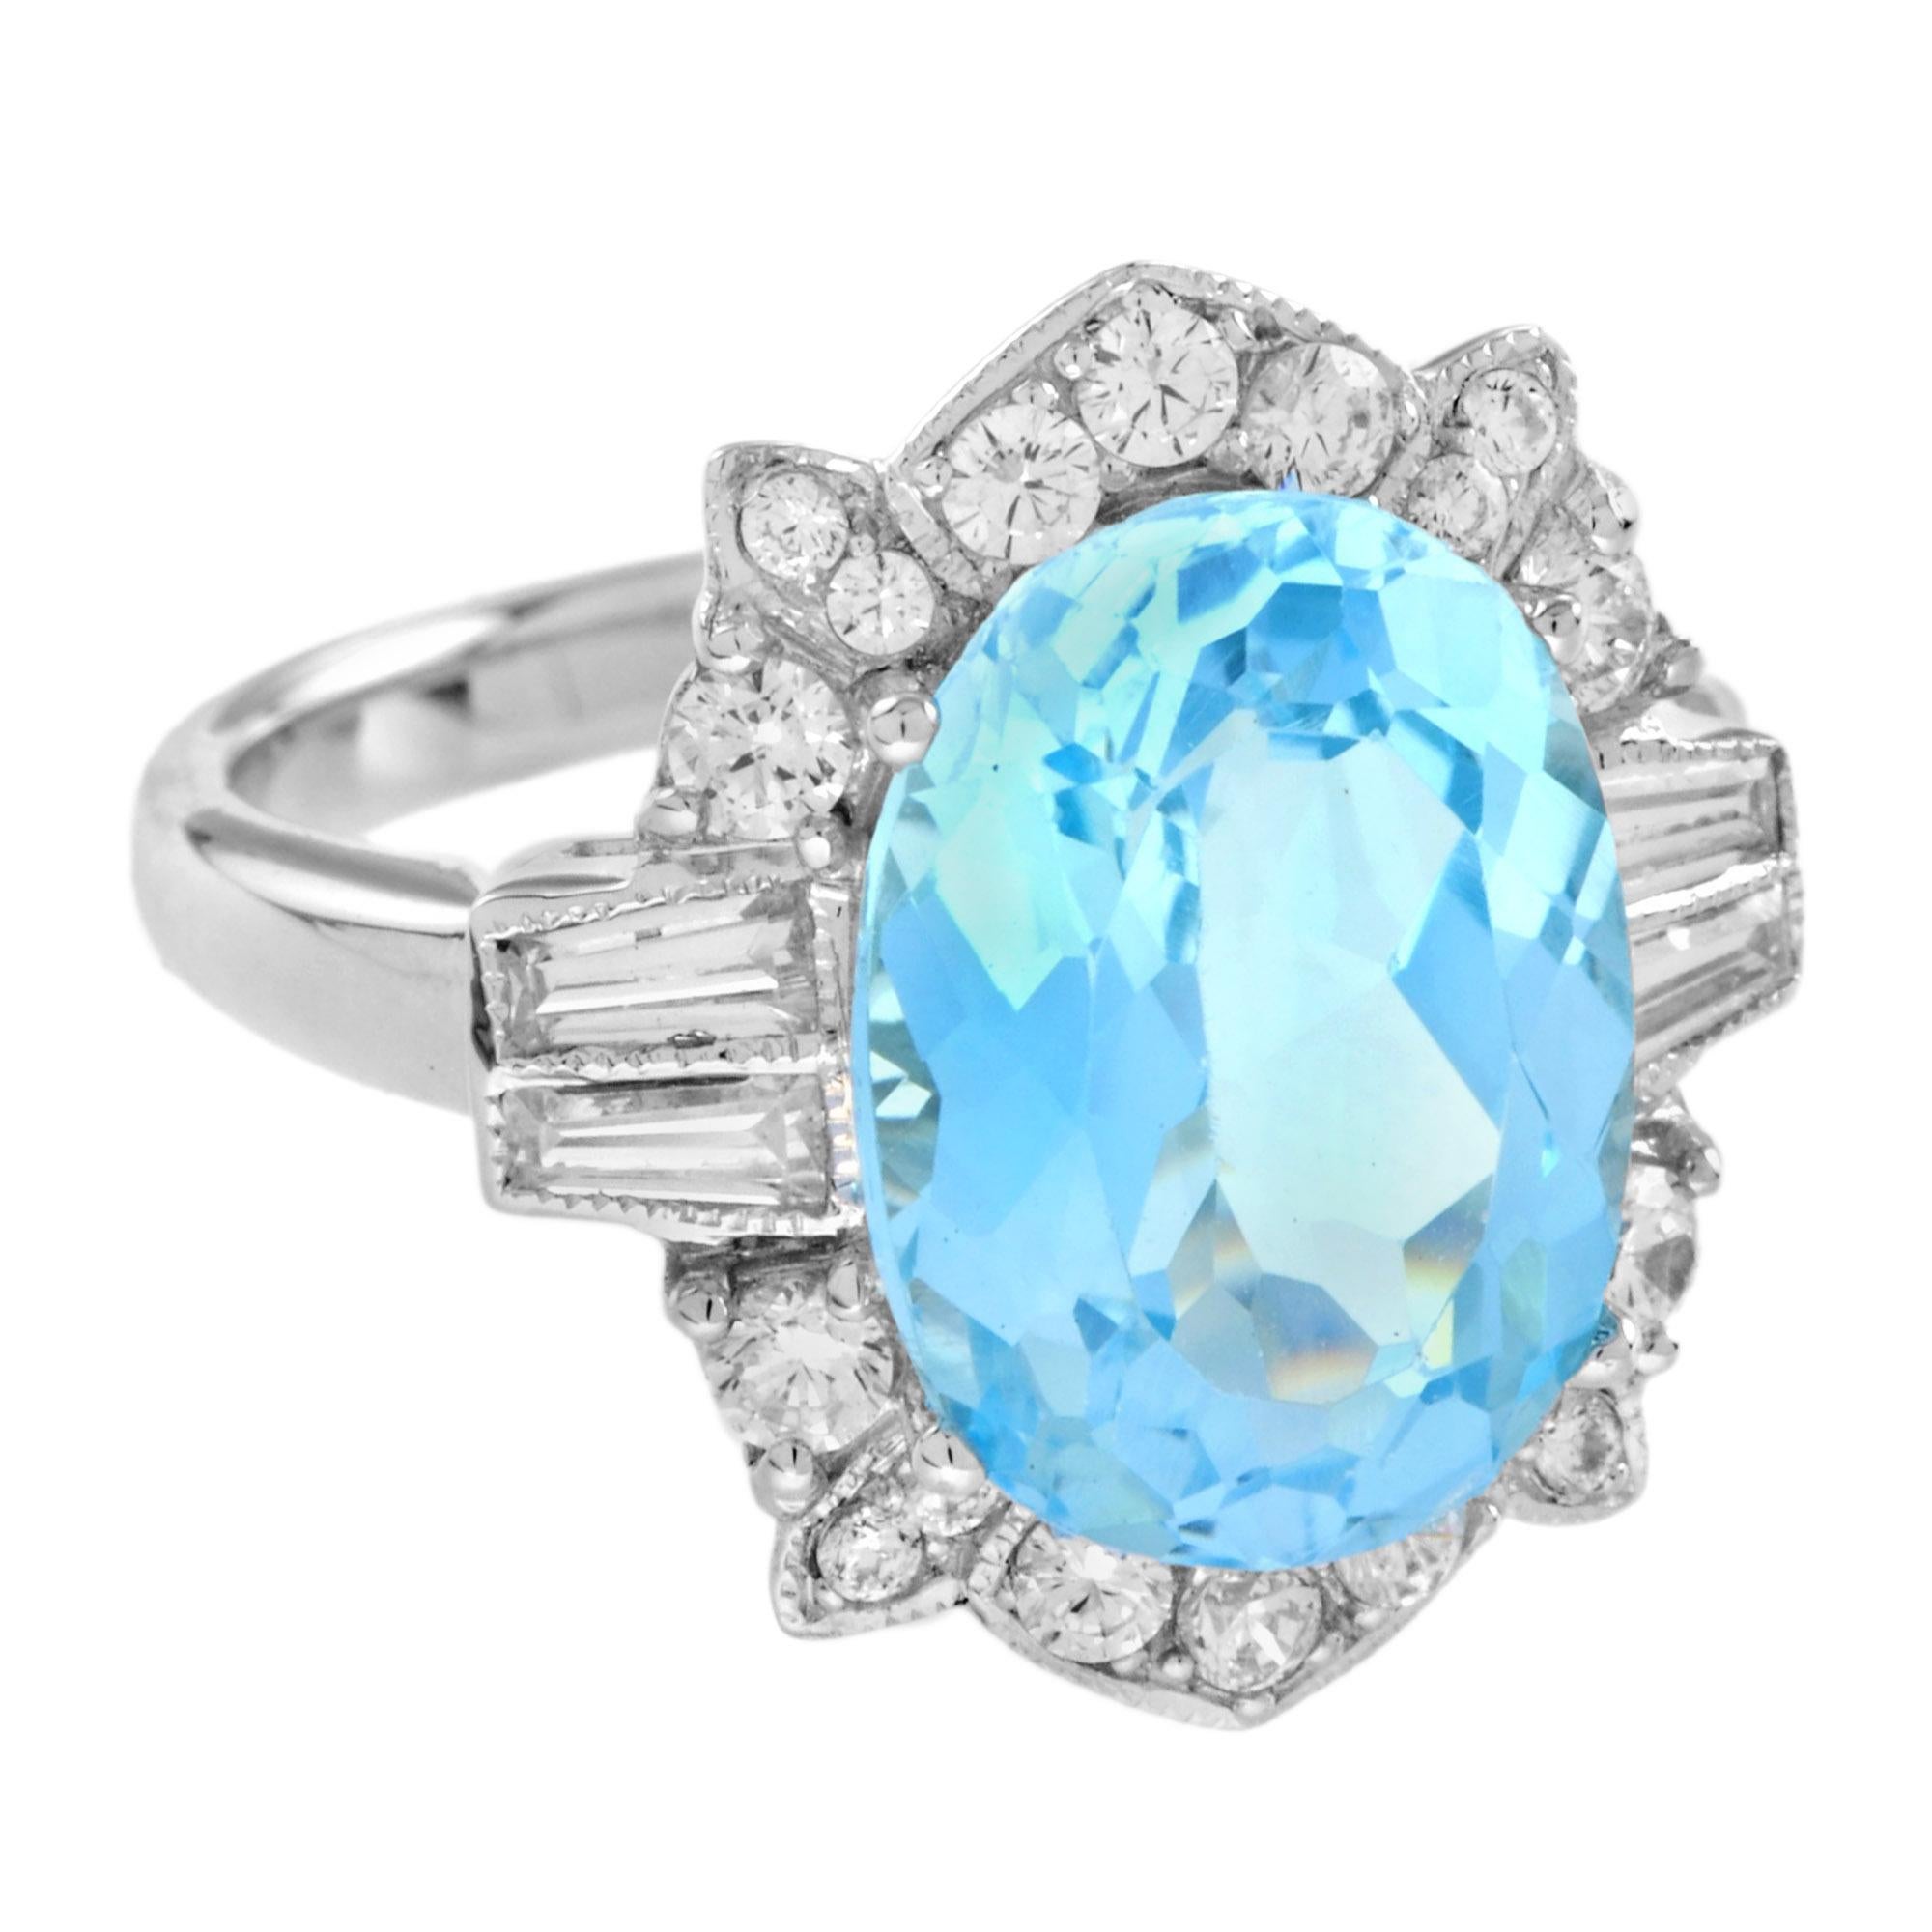 For Sale:  7.25 Ct. Oval Blue Topaz and Diamond Cocktail Ring in 18K White Gold 2